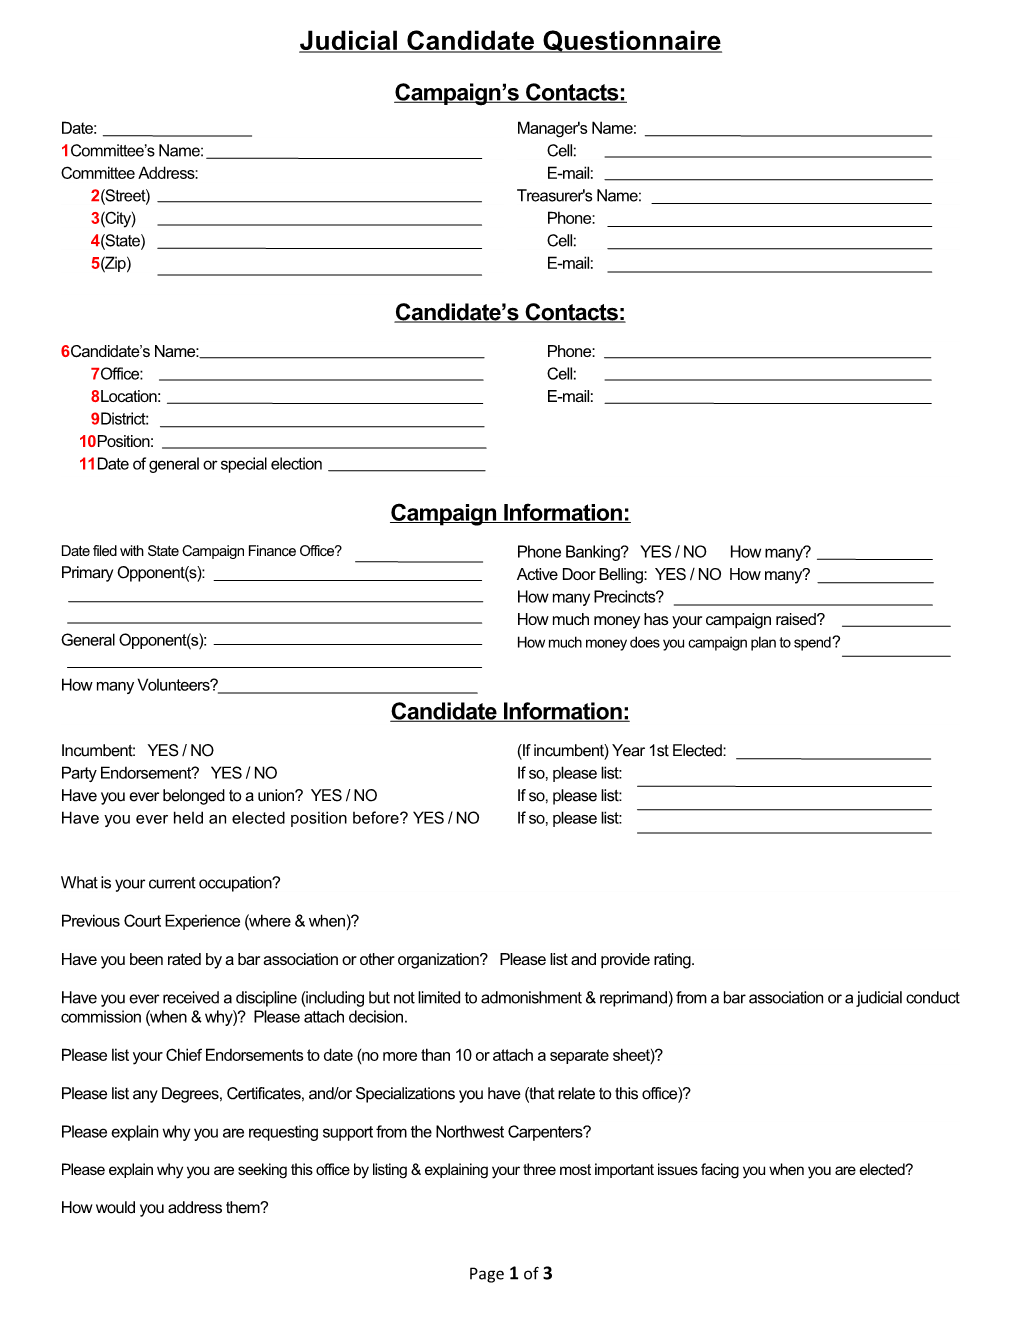 Judicial Candidate Questionnaire